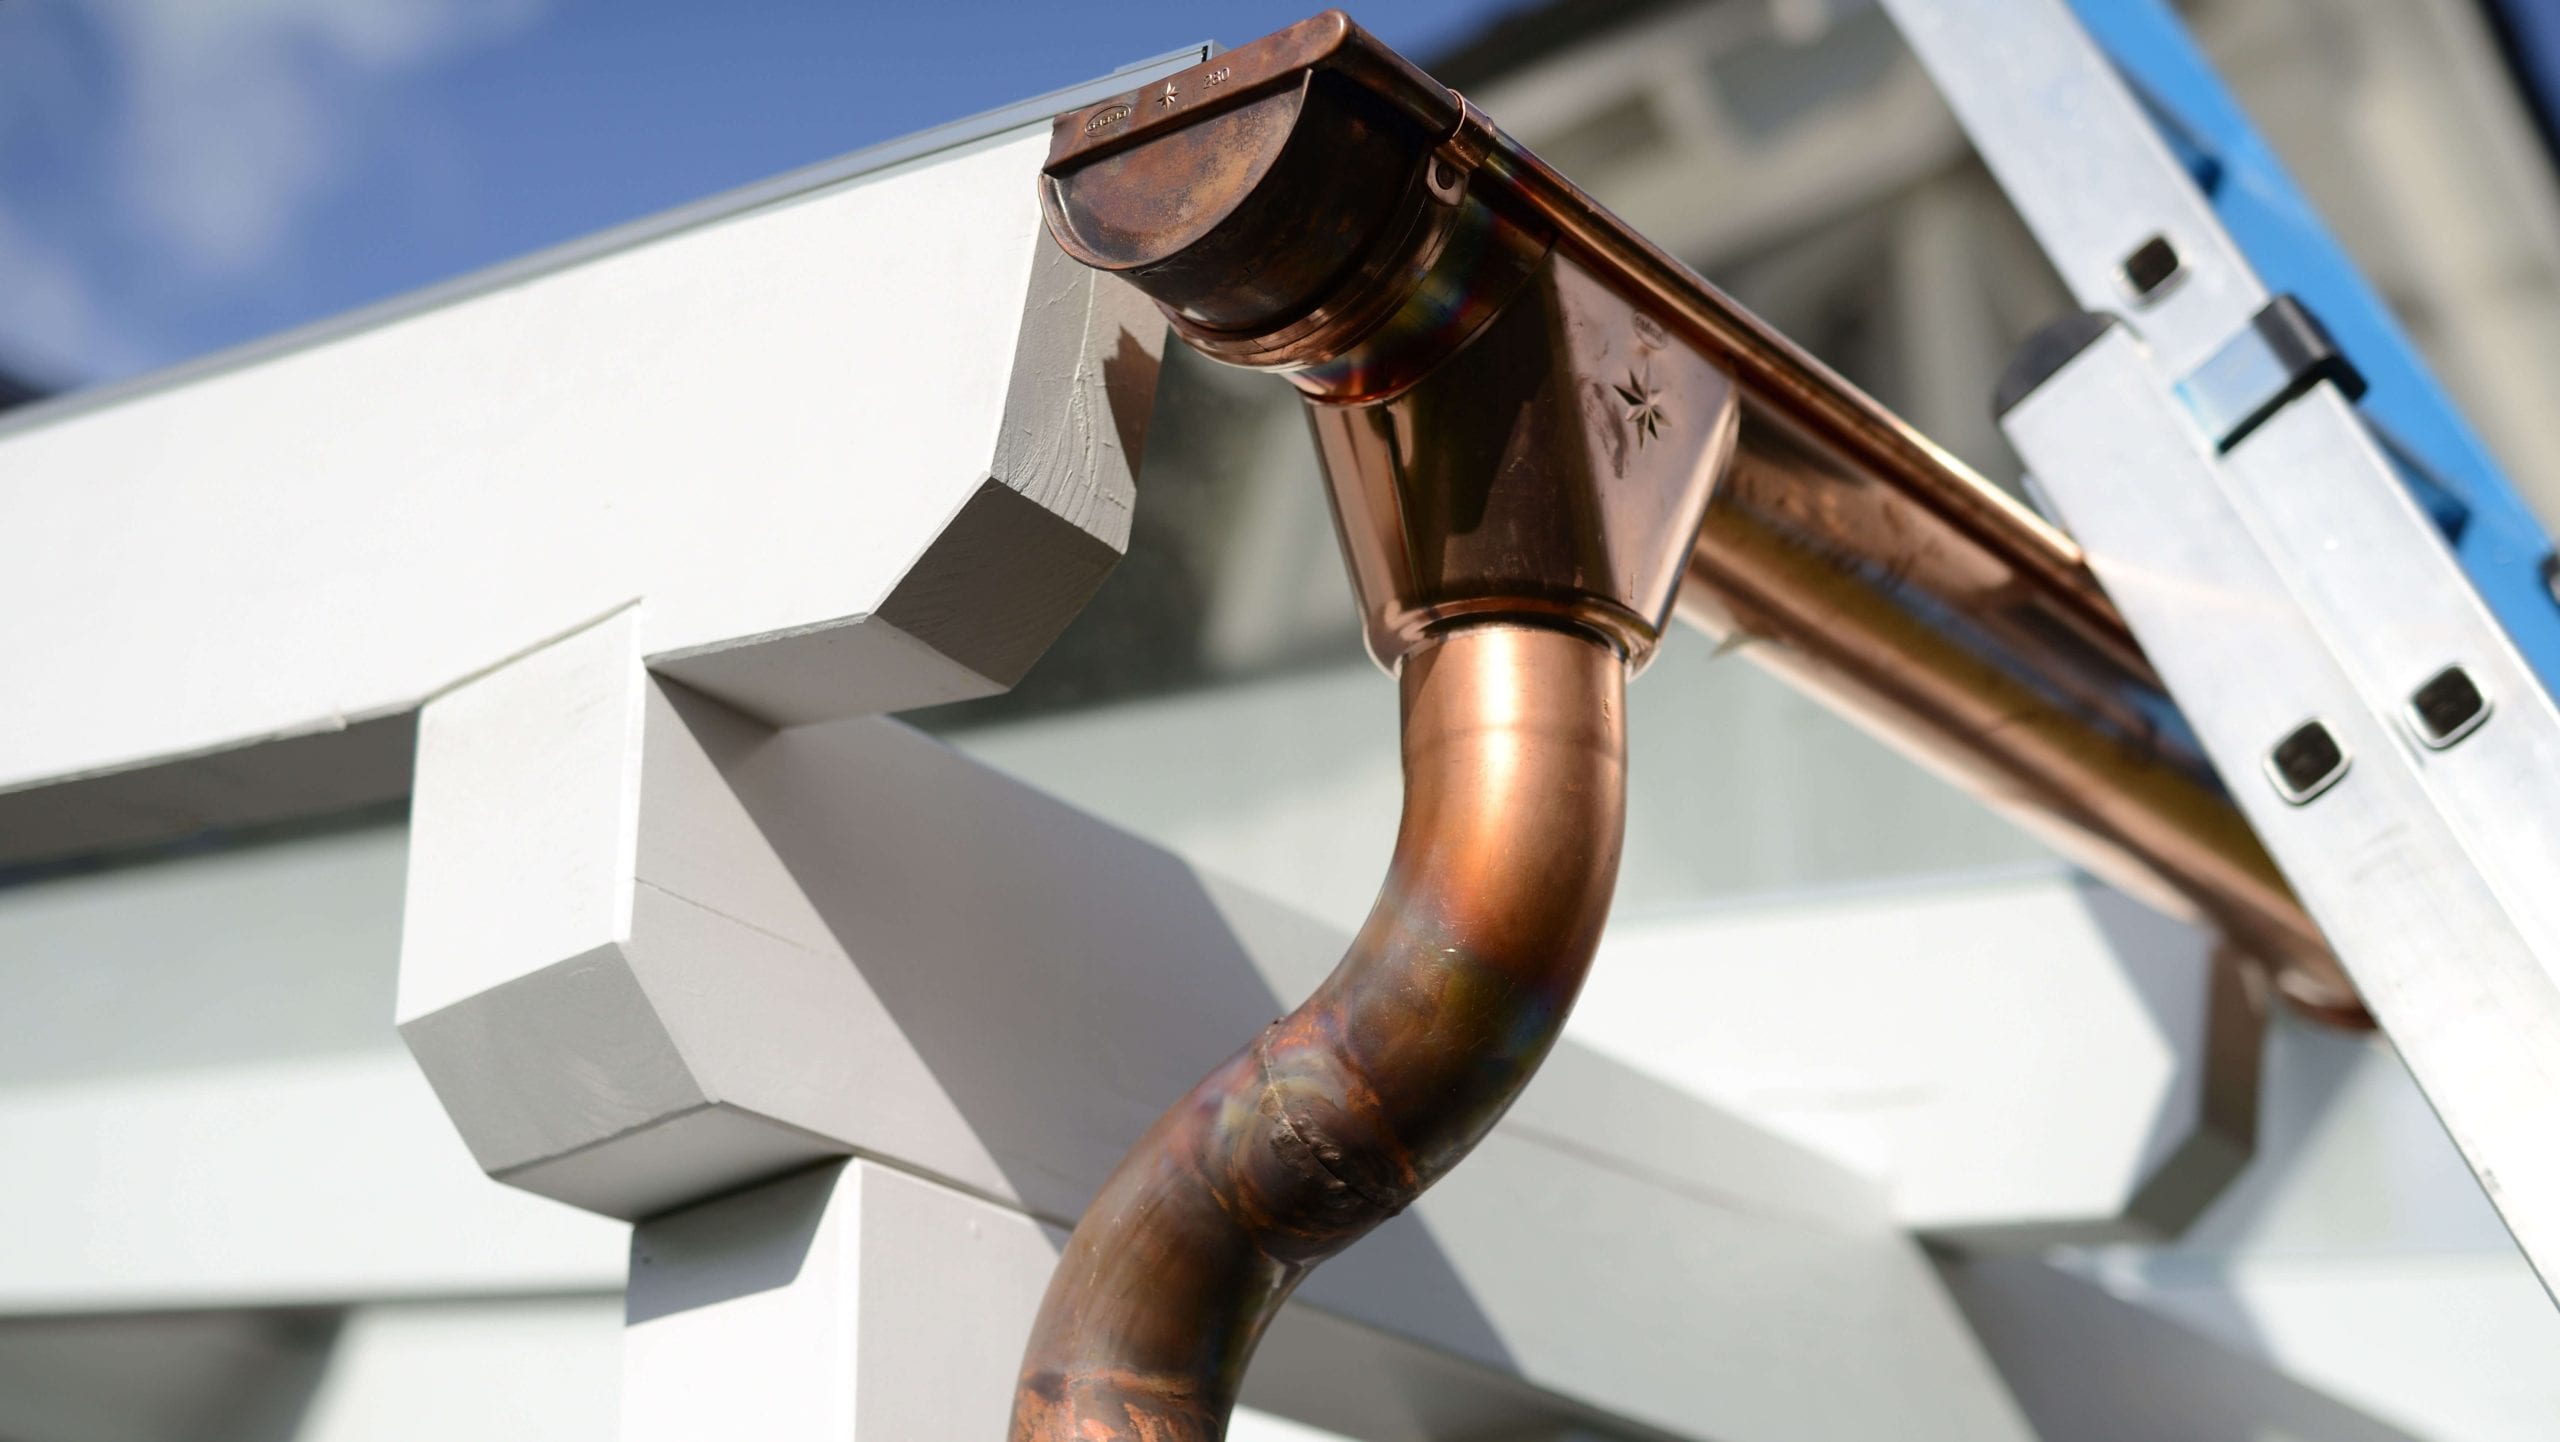 Make your property stand out with copper gutters. Contact for gutter installation in Louisville